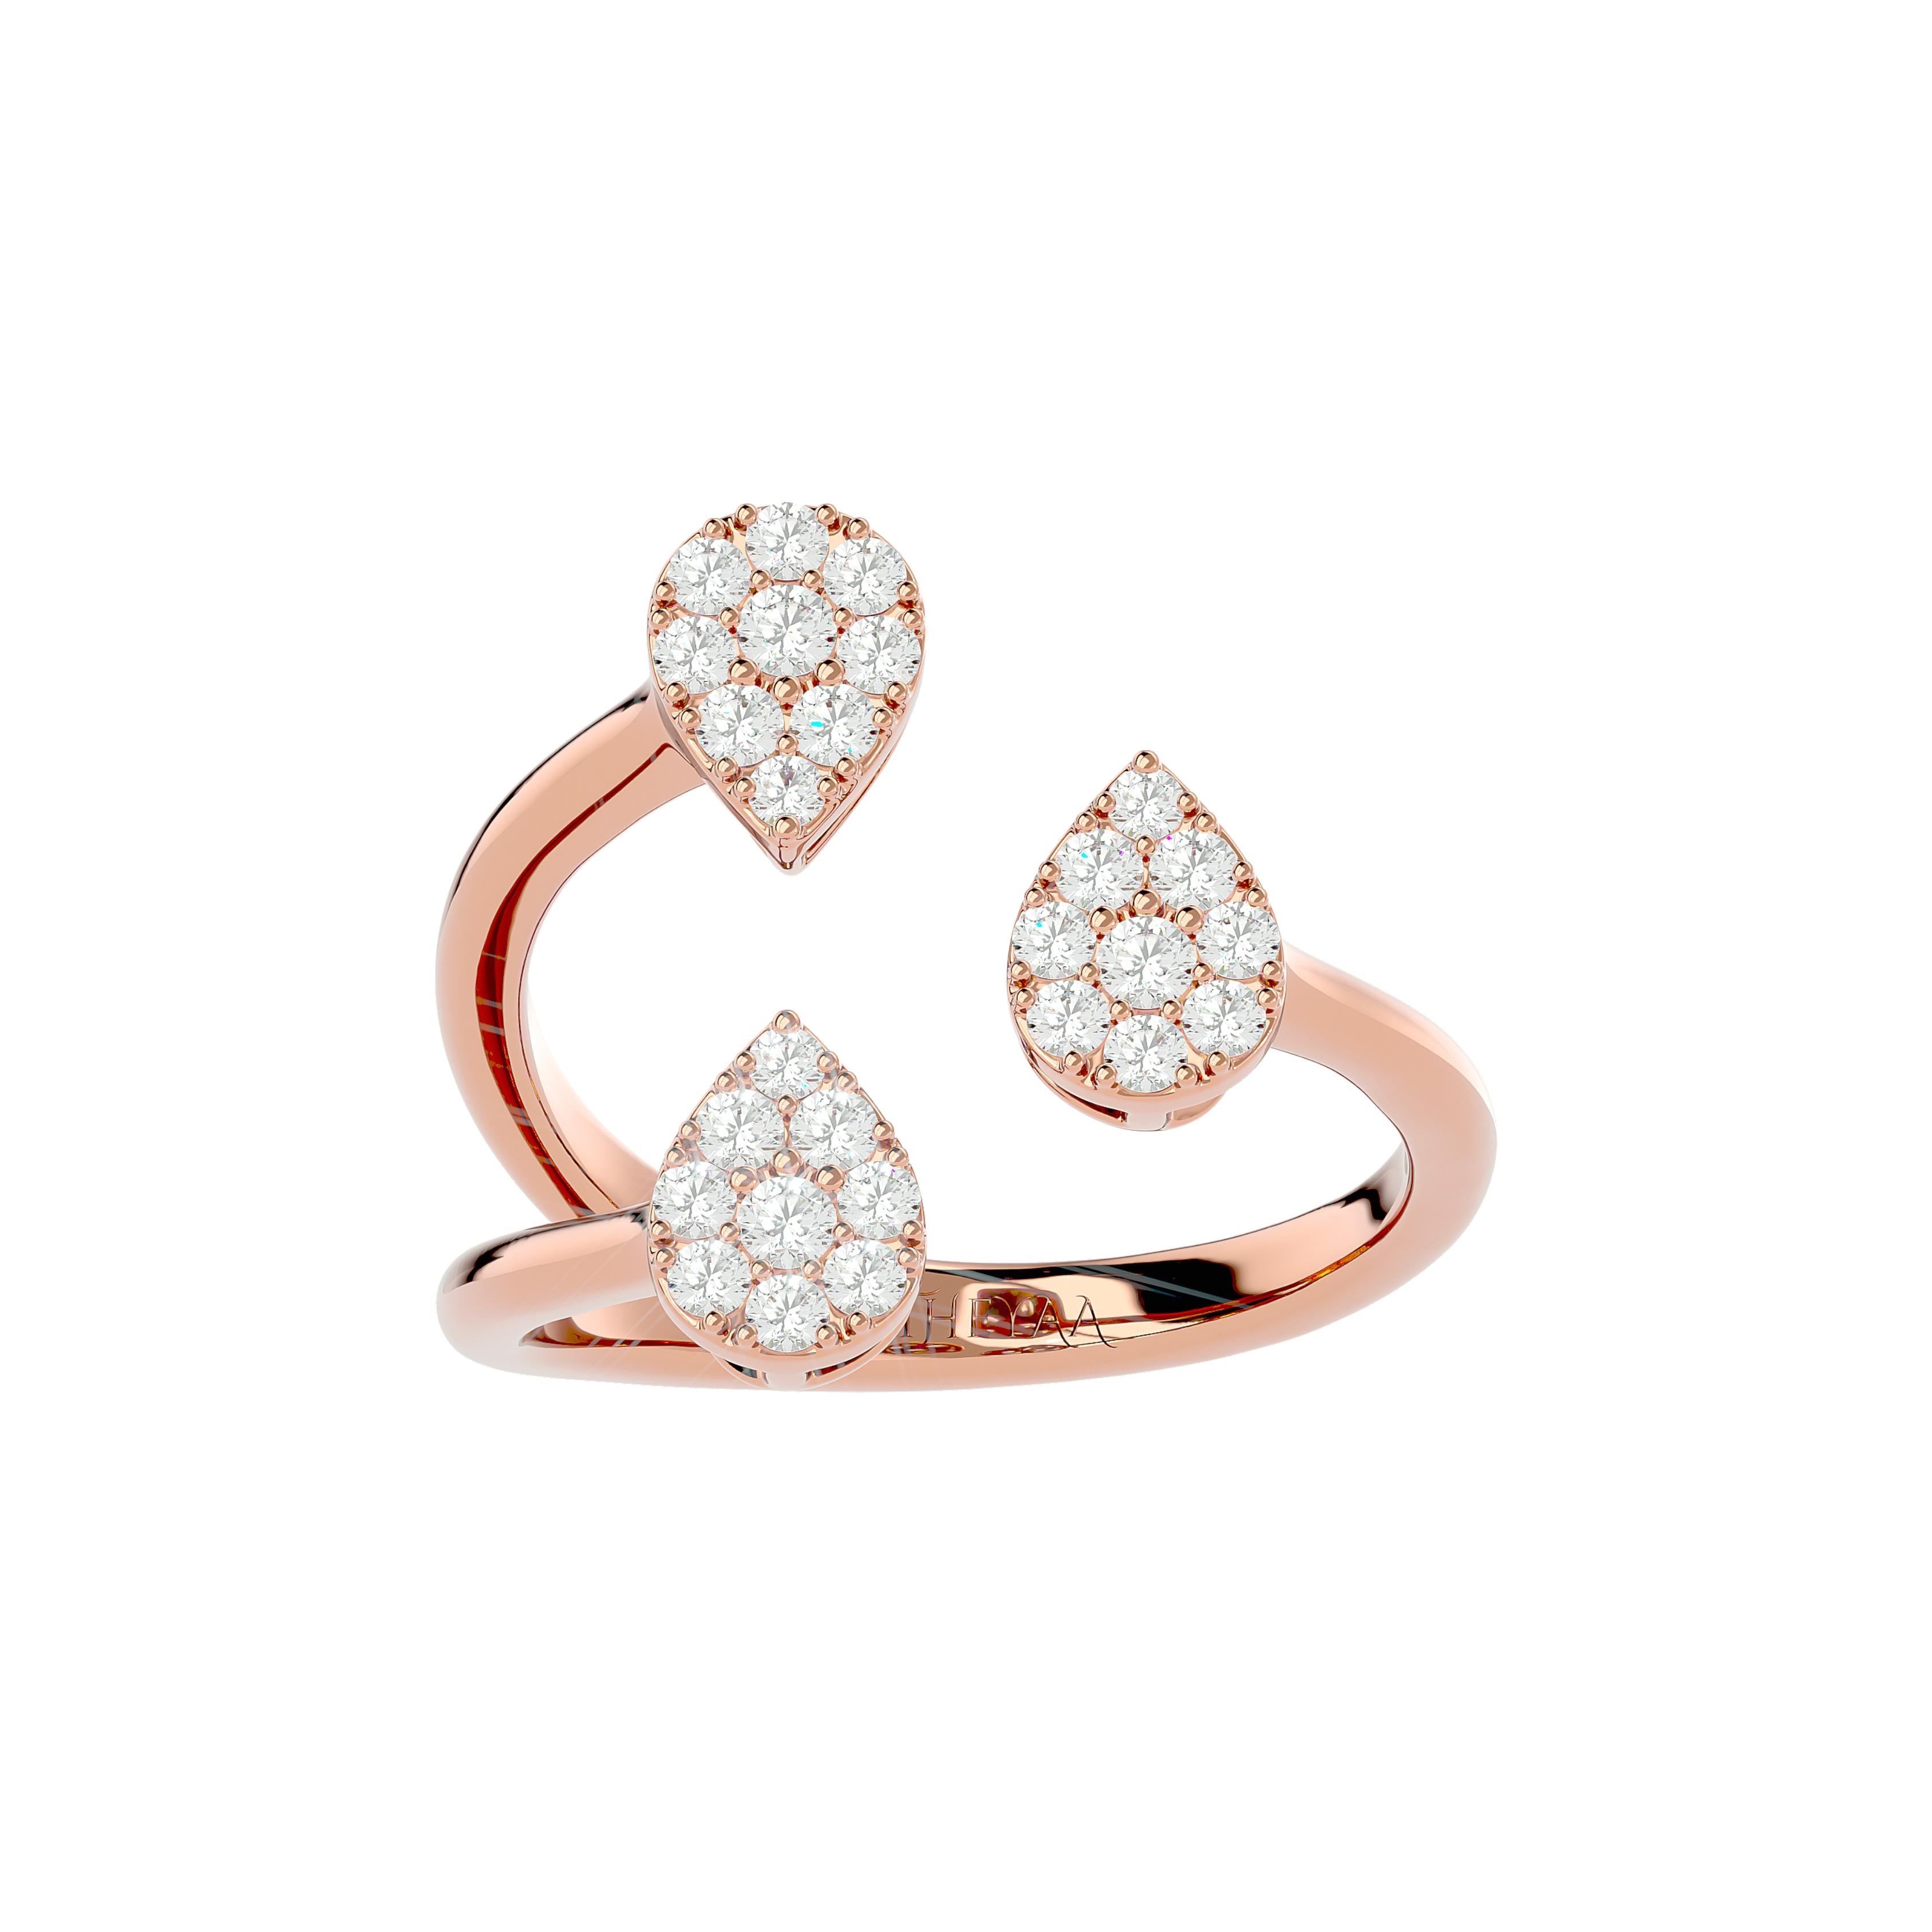 Elements
This eye-catching Three-Pear Shaped Cluster Diamond Ring is the perfect way to add some sparkle to your look. With diamonds and gold, it's sure to attract everyone's attention.

Innovation
The ring is inspired by the symbol of tears of joy,